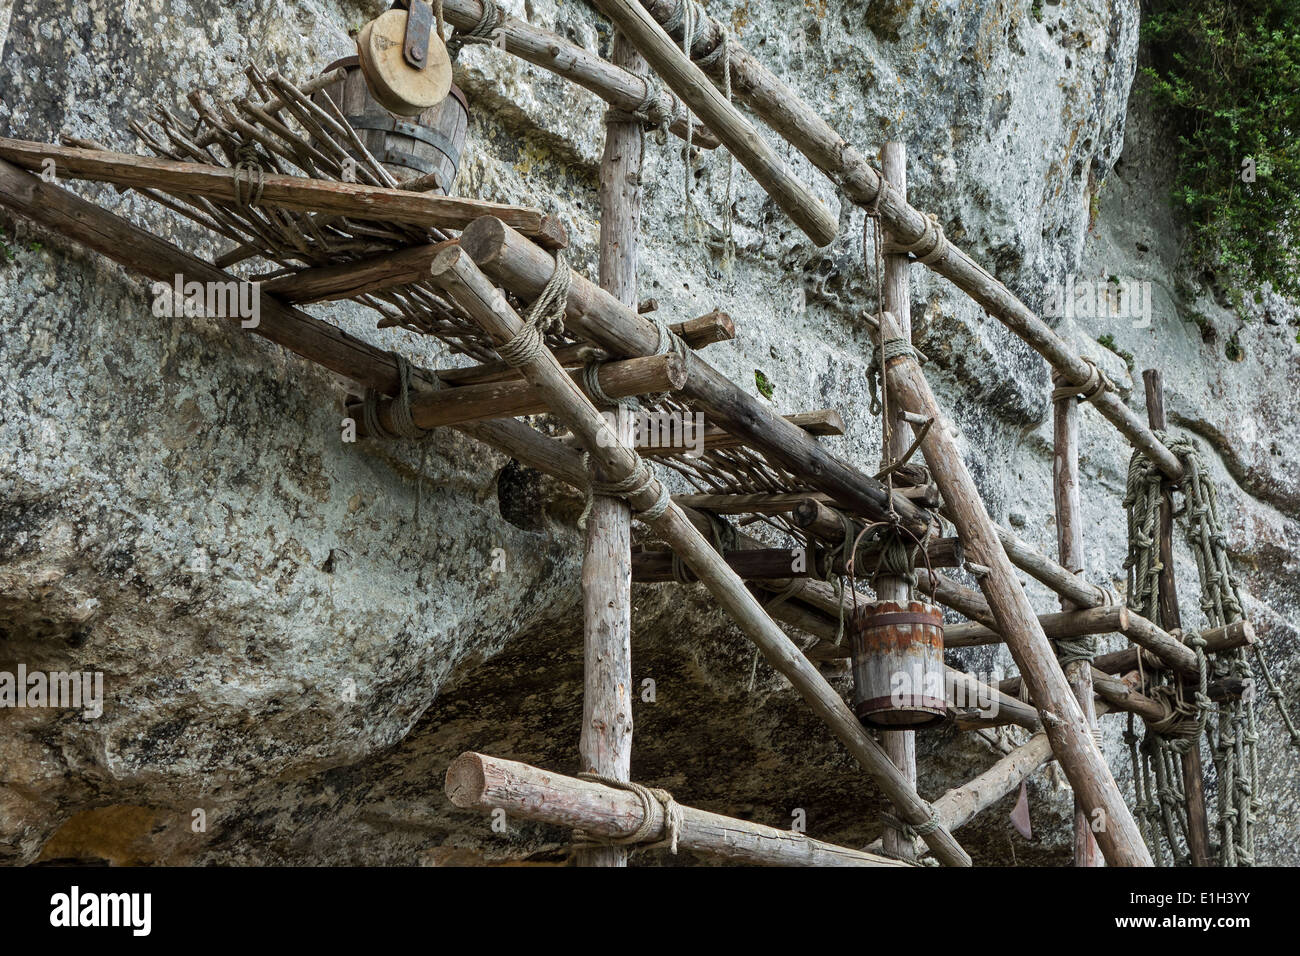 Medieval wooden scaffolding at the fortified troglodyte town La Roque Saint-Christophe, Peyzac-le-Moustier, Dordogne, France Stock Photo